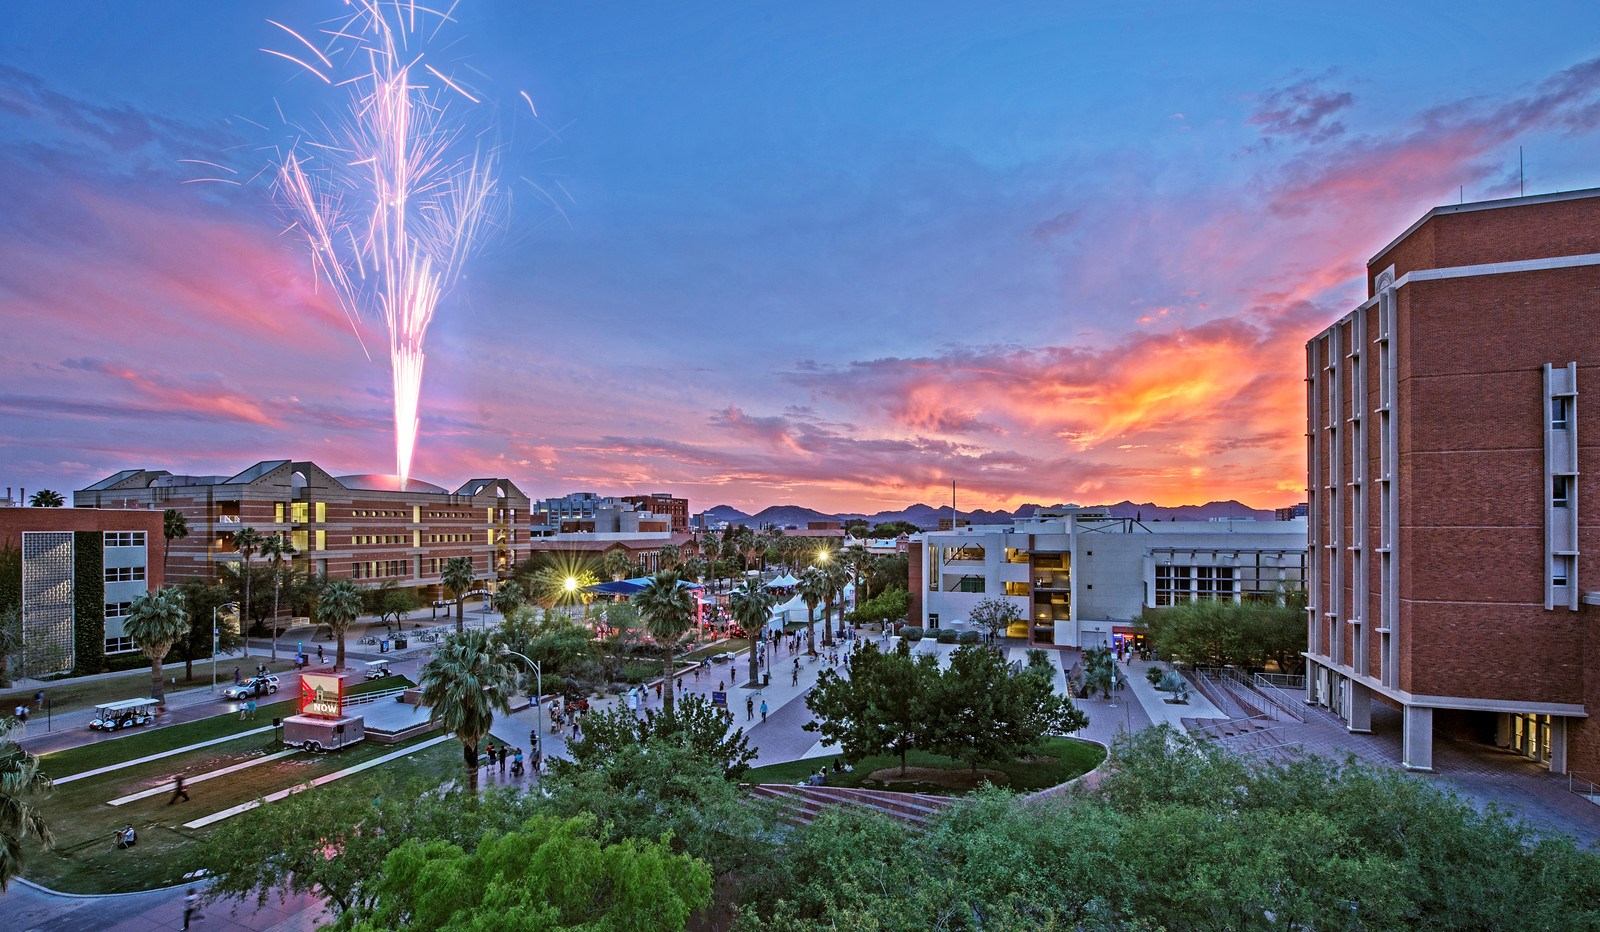 This is a panorama shot of the the University of Arizona main campus.